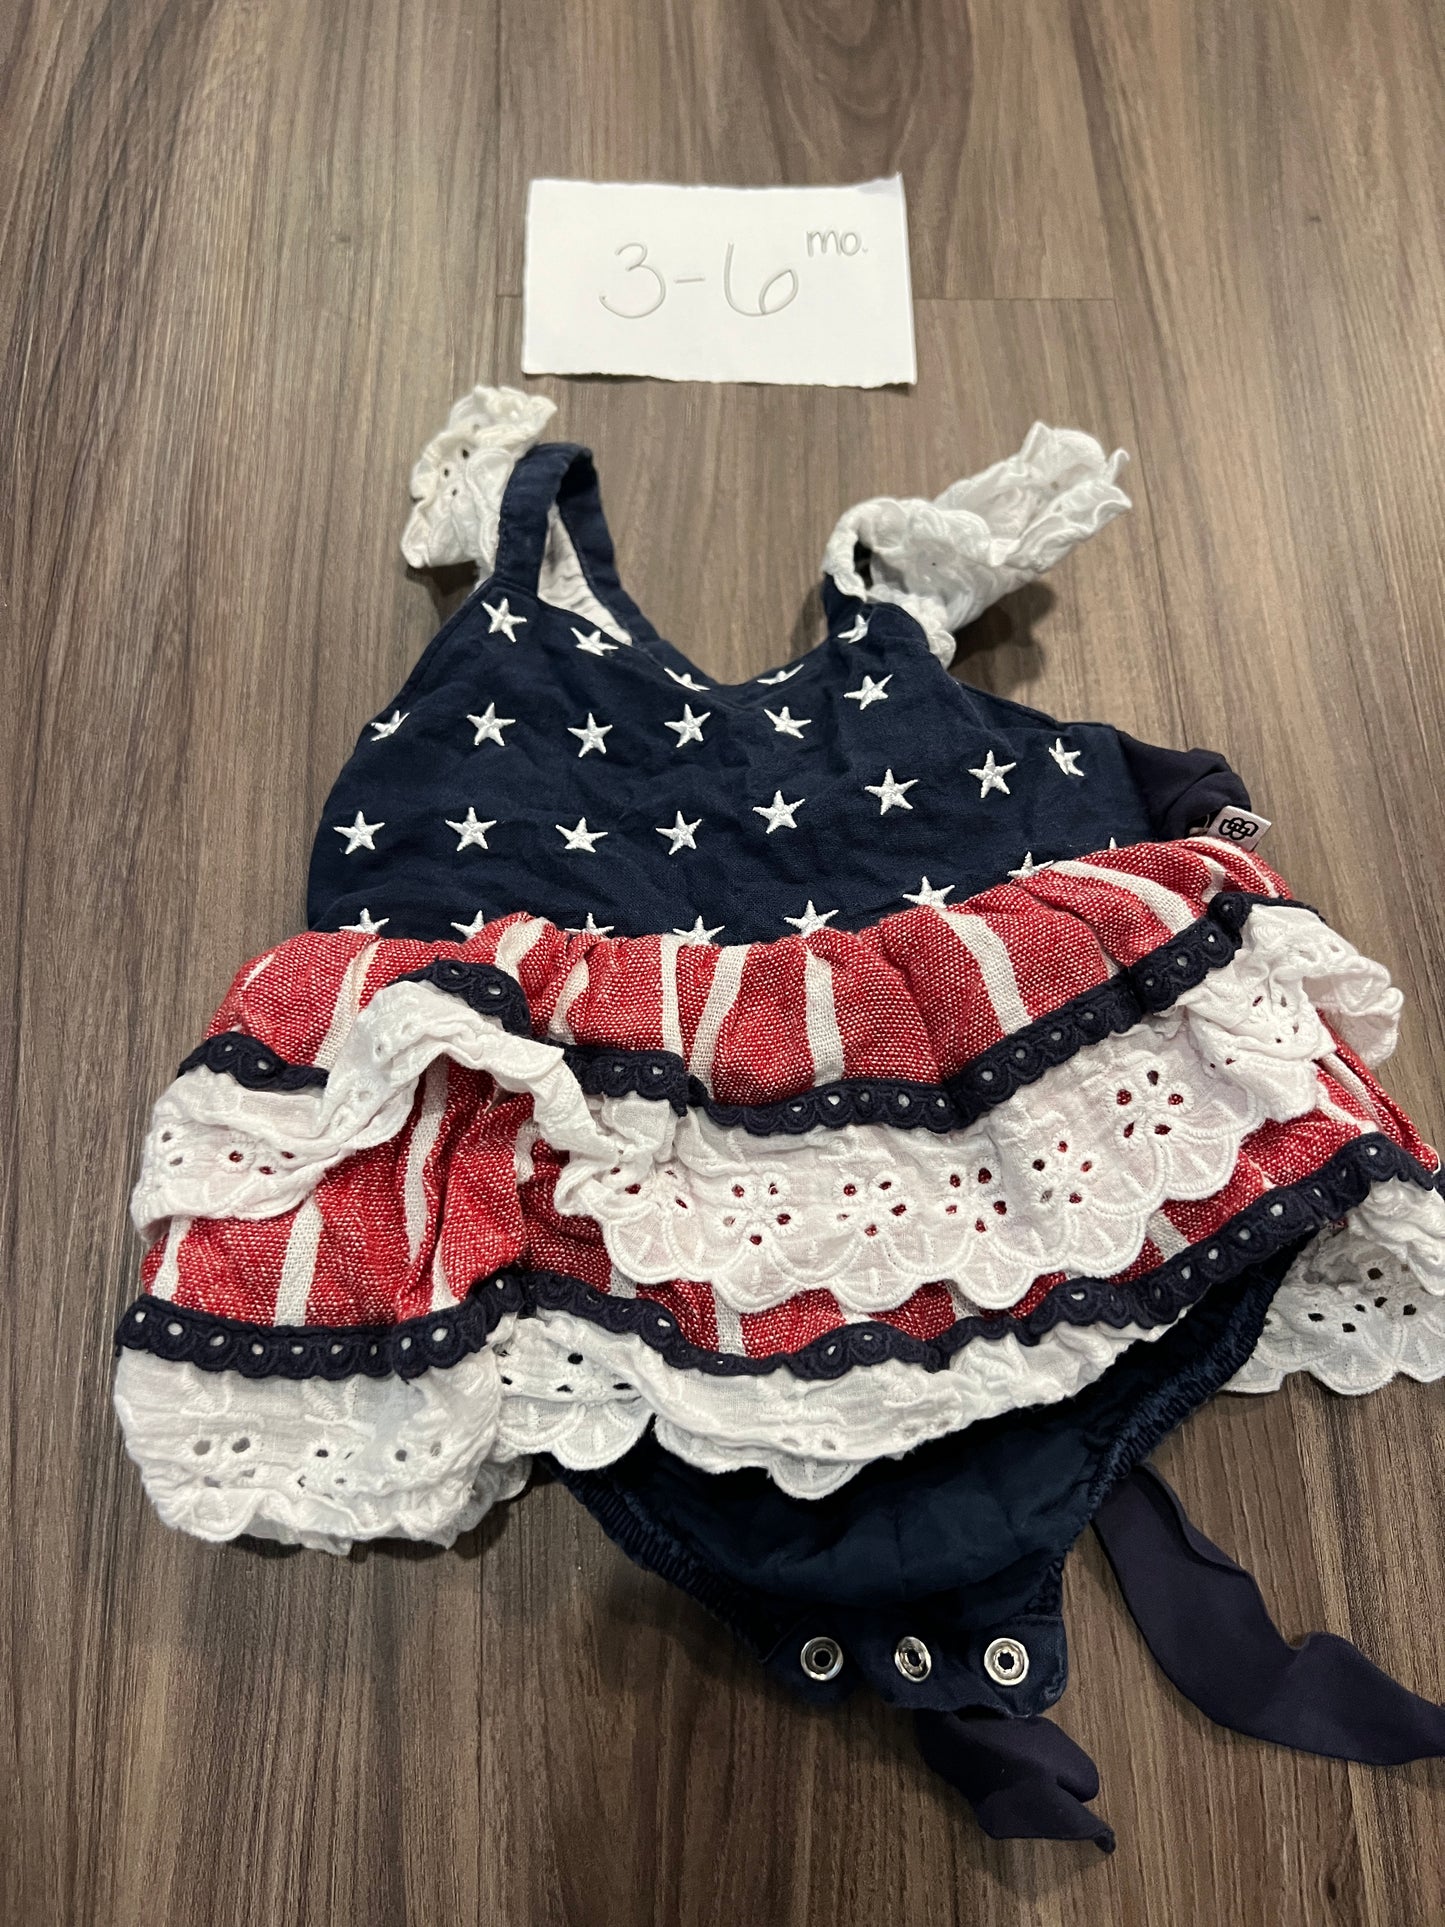 3-6 Mo - Bums & Roses - Red/White/Blue Dress - PU 45236 Except Semiannual Sale